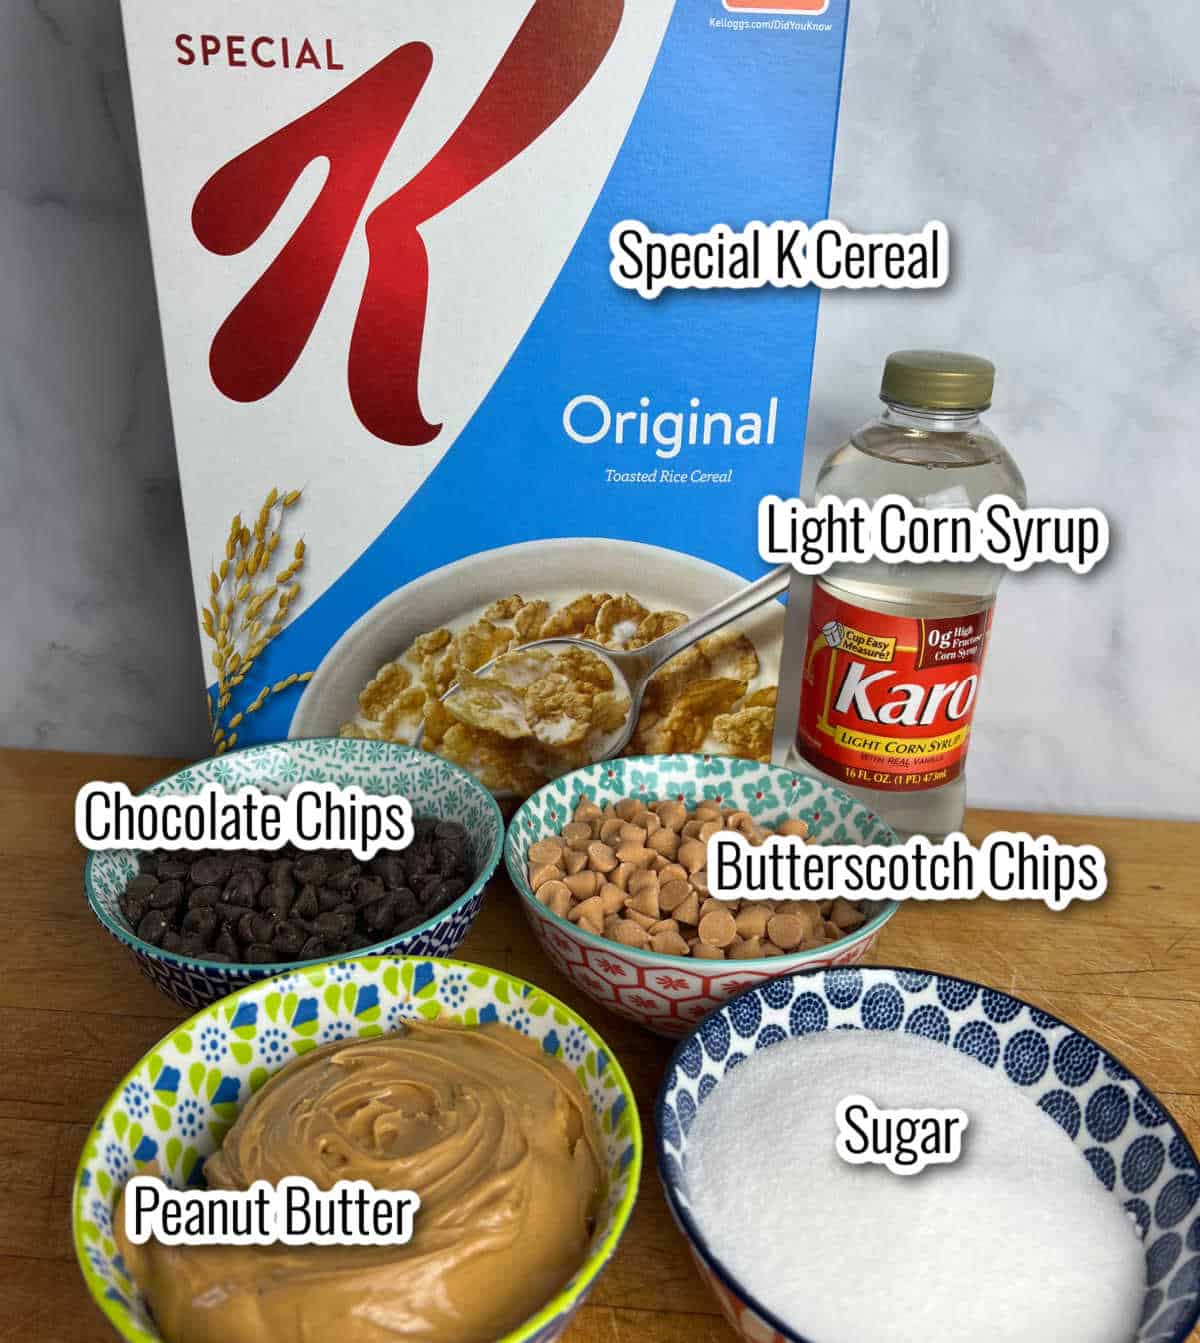 ingredients for special K cereal including cereal, light corn syrup, chocolate and butterscotch chips, peanut butter and sugar.